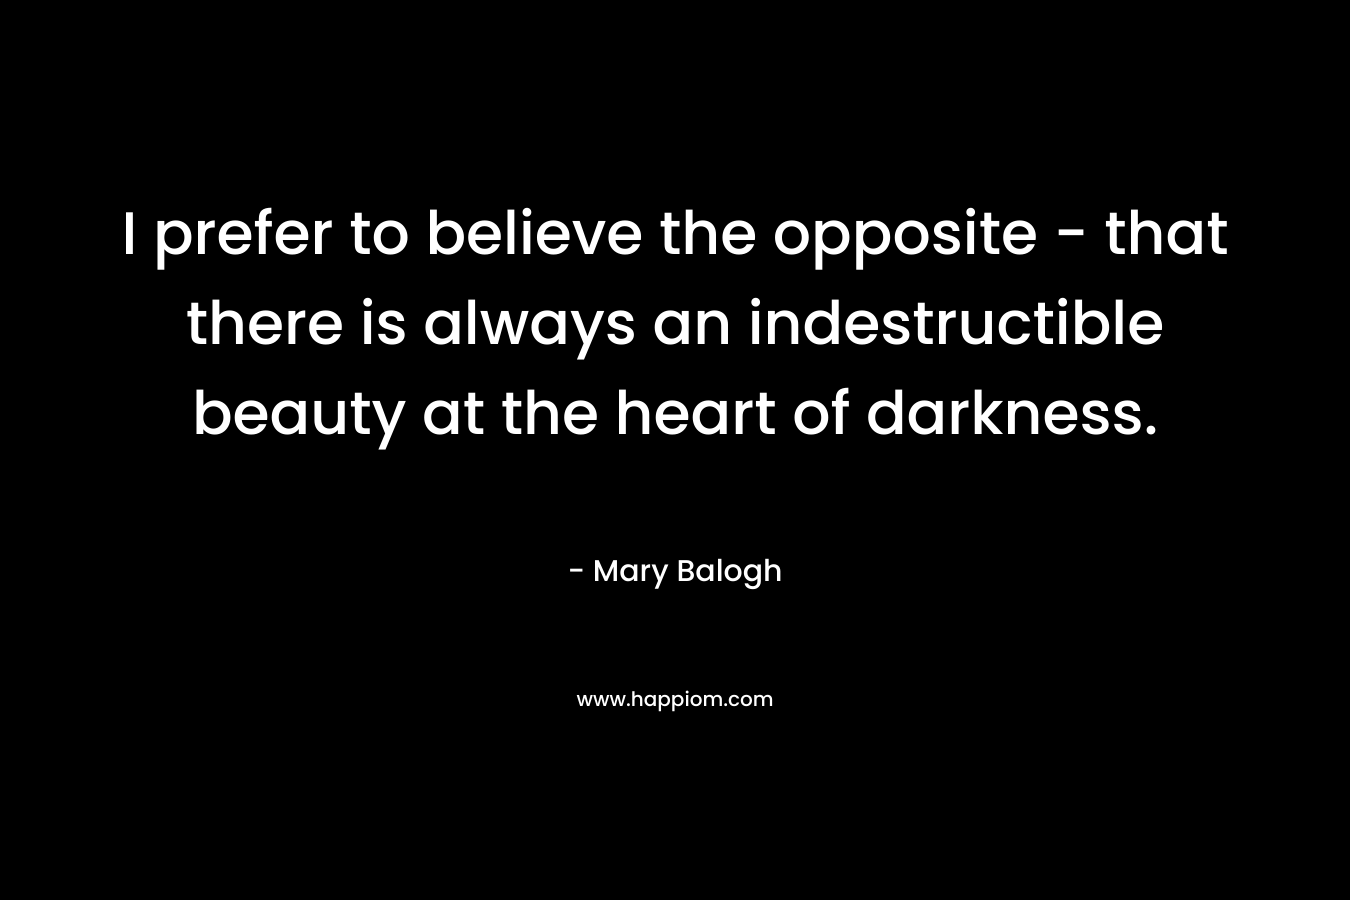 I prefer to believe the opposite - that there is always an indestructible beauty at the heart of darkness.